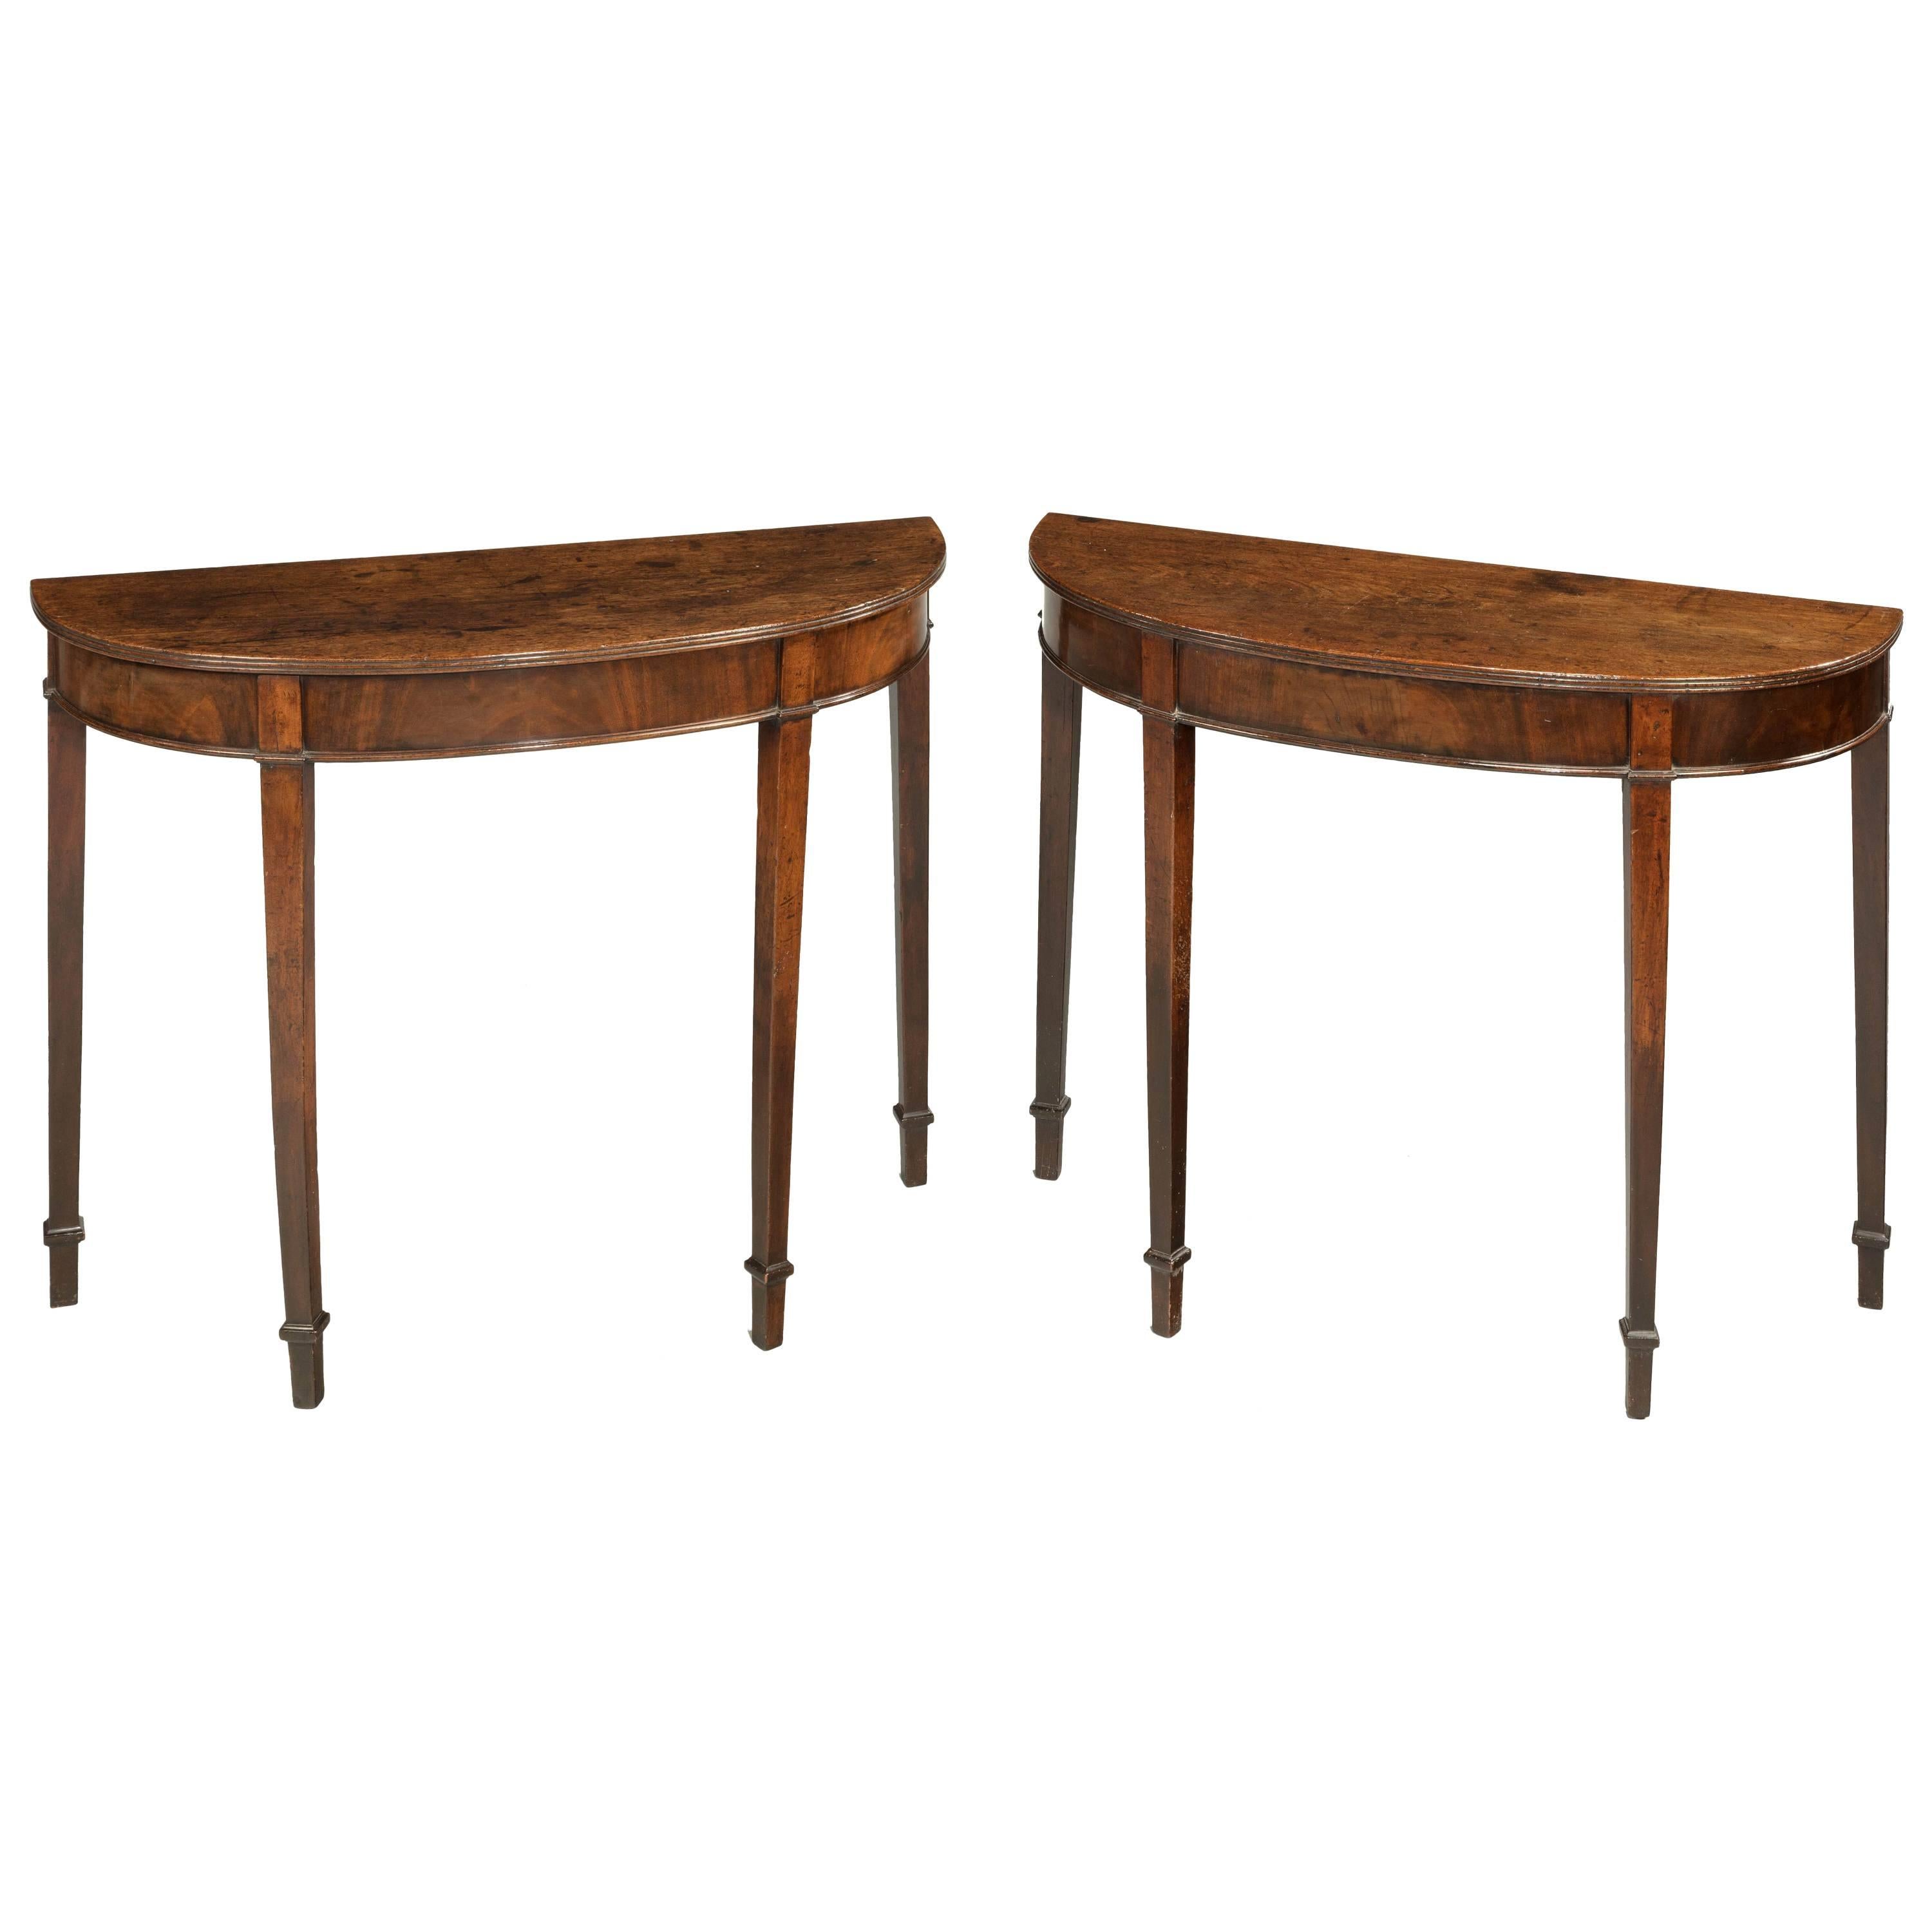 Pair of George III Period Bow Front Pier Tables